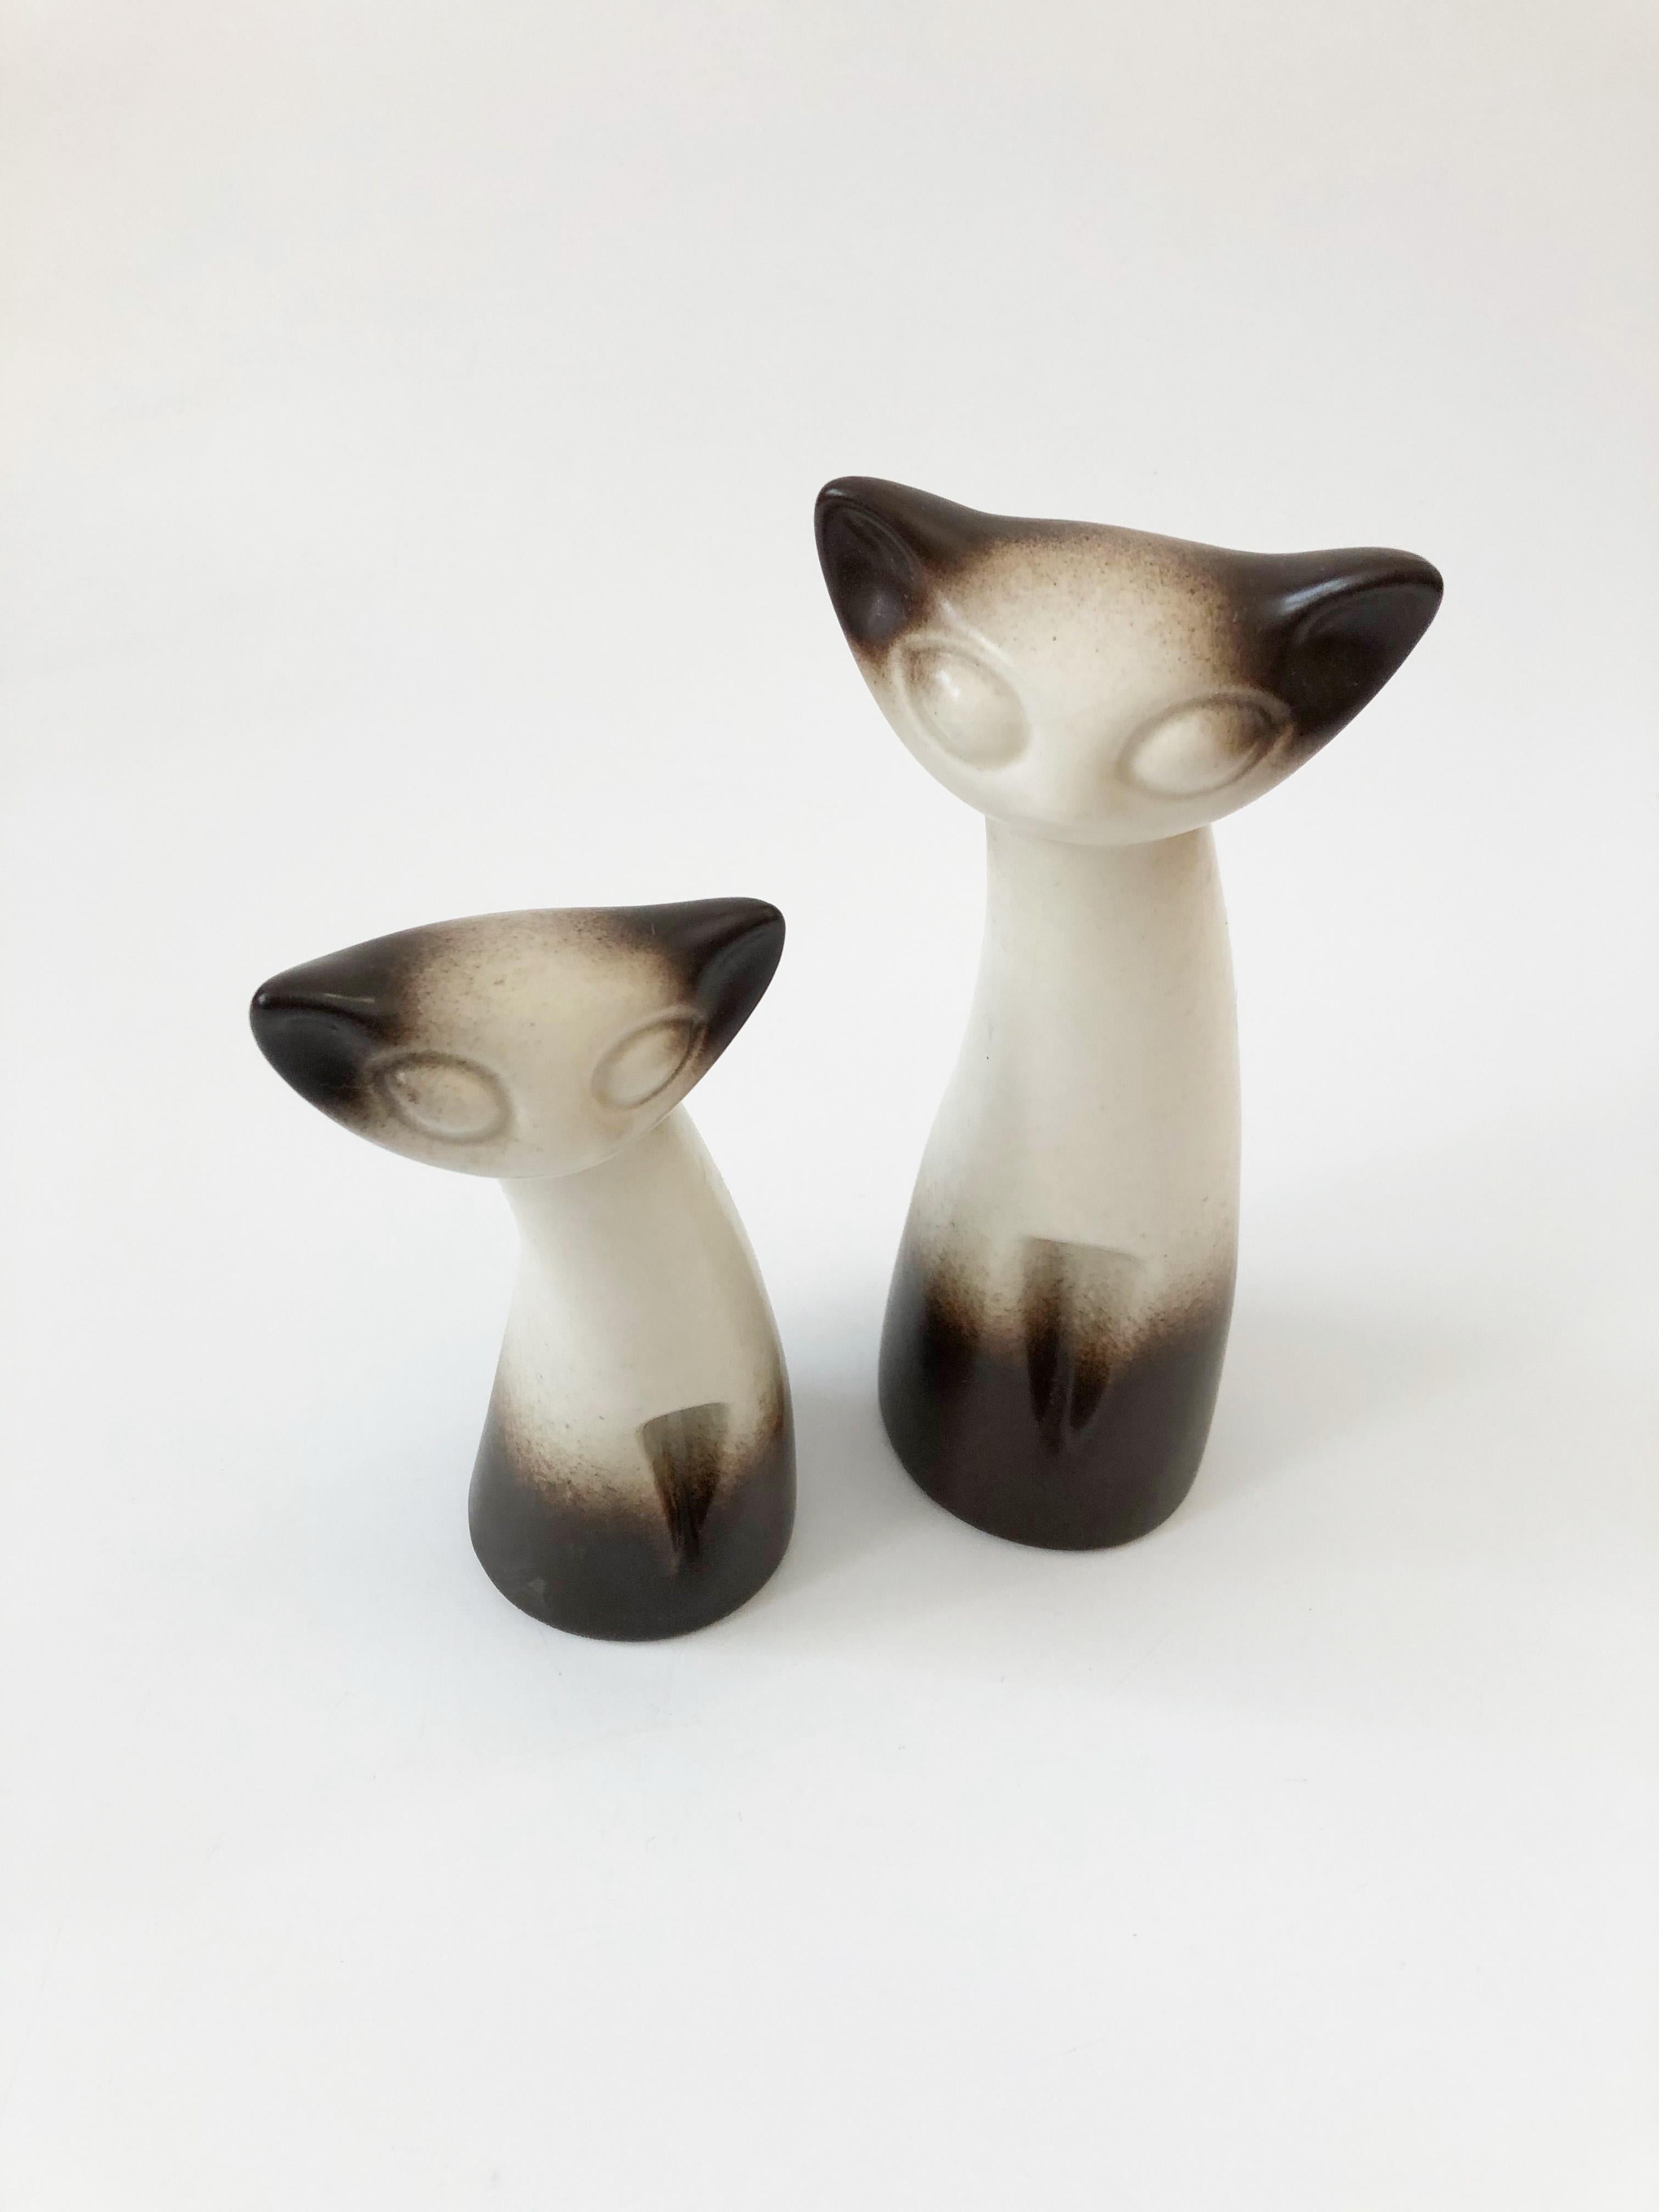 A wonderful pair of pottery cats by Howard Pierce. Nice larger size, each cat is a different height. Beautiful signature matte glaze that fades from dark brown to off-white. Each is marked 